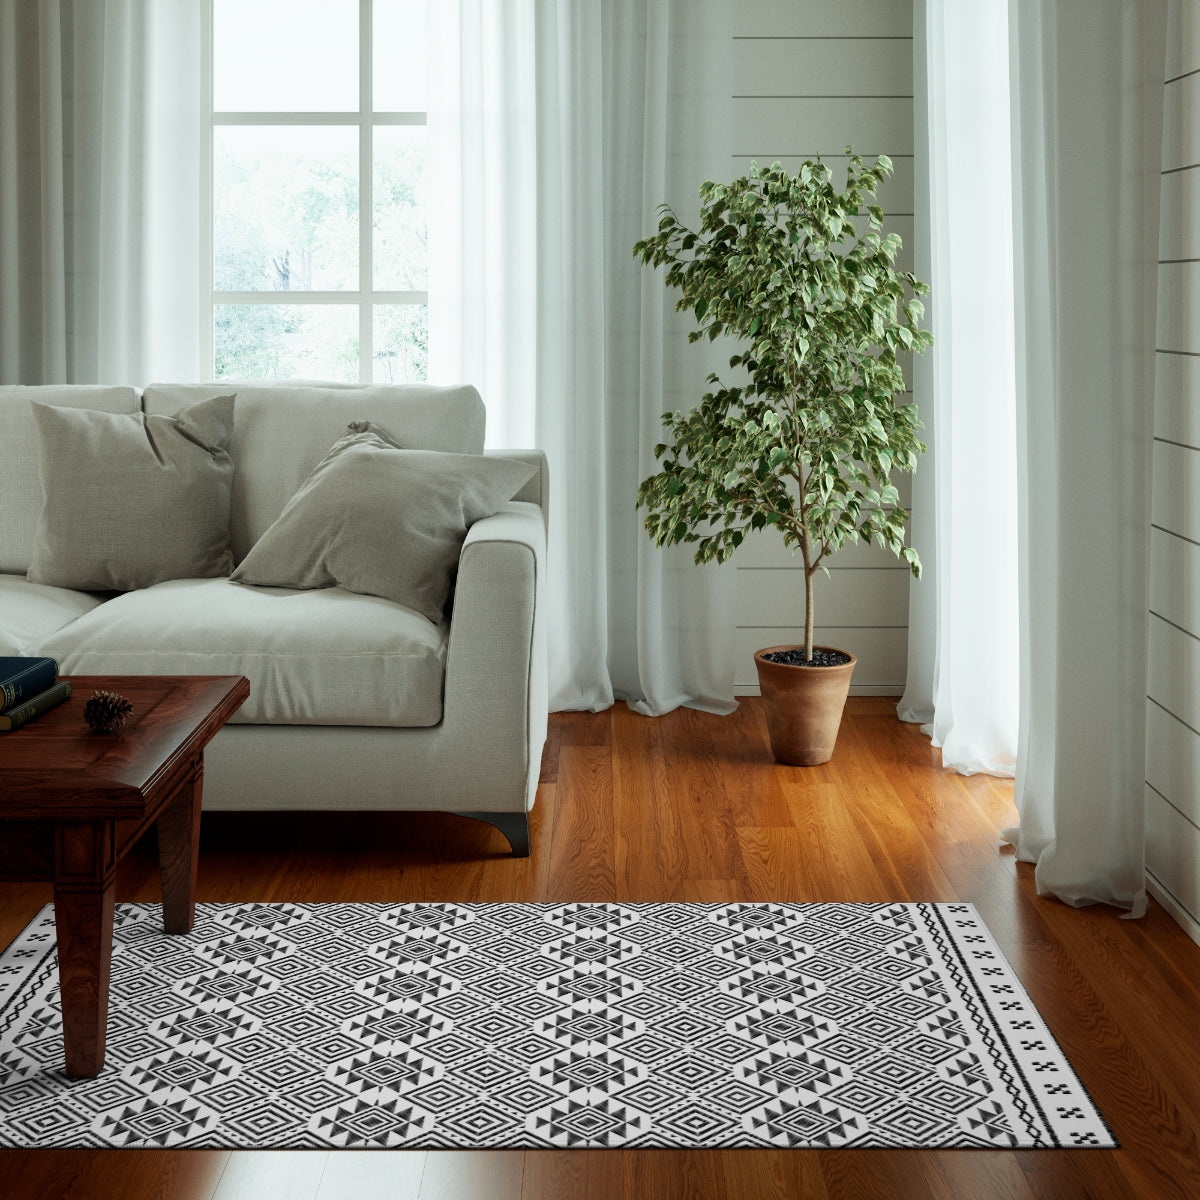 Load image into Gallery viewer, Aztec - Rug | Home Decor | PARADIS SVP
